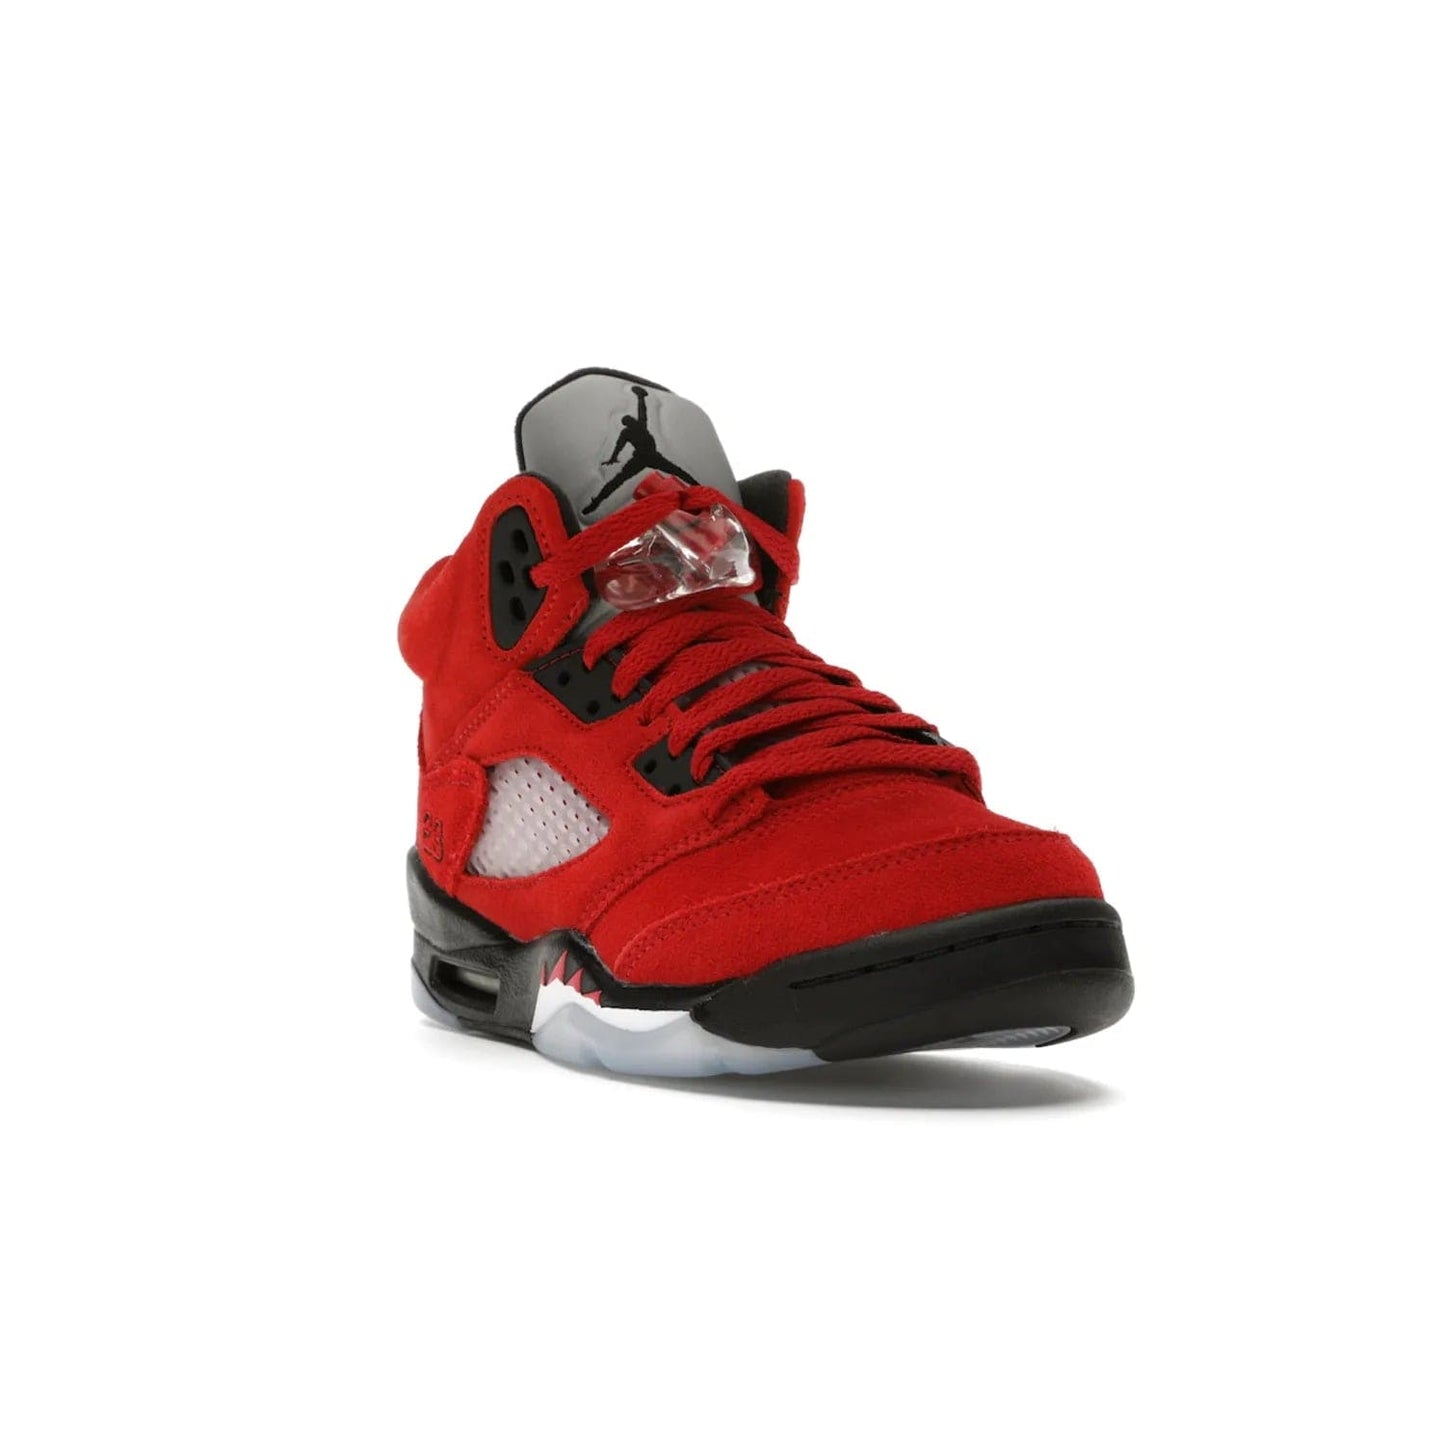 Jordan 5 Retro Raging Bull Red (2021) (GS) - Image 7 - Only at www.BallersClubKickz.com - Jordan 5 Retro Raging Bulls Red 2021 GS. Varsity Red suede upper with embroidered number 23, black leather detail, red laces, and midsole with air cushioning. Jumpman logos on tongue, heel, and outsole. On-trend streetwear and basketball style. Released April 10, 2021.